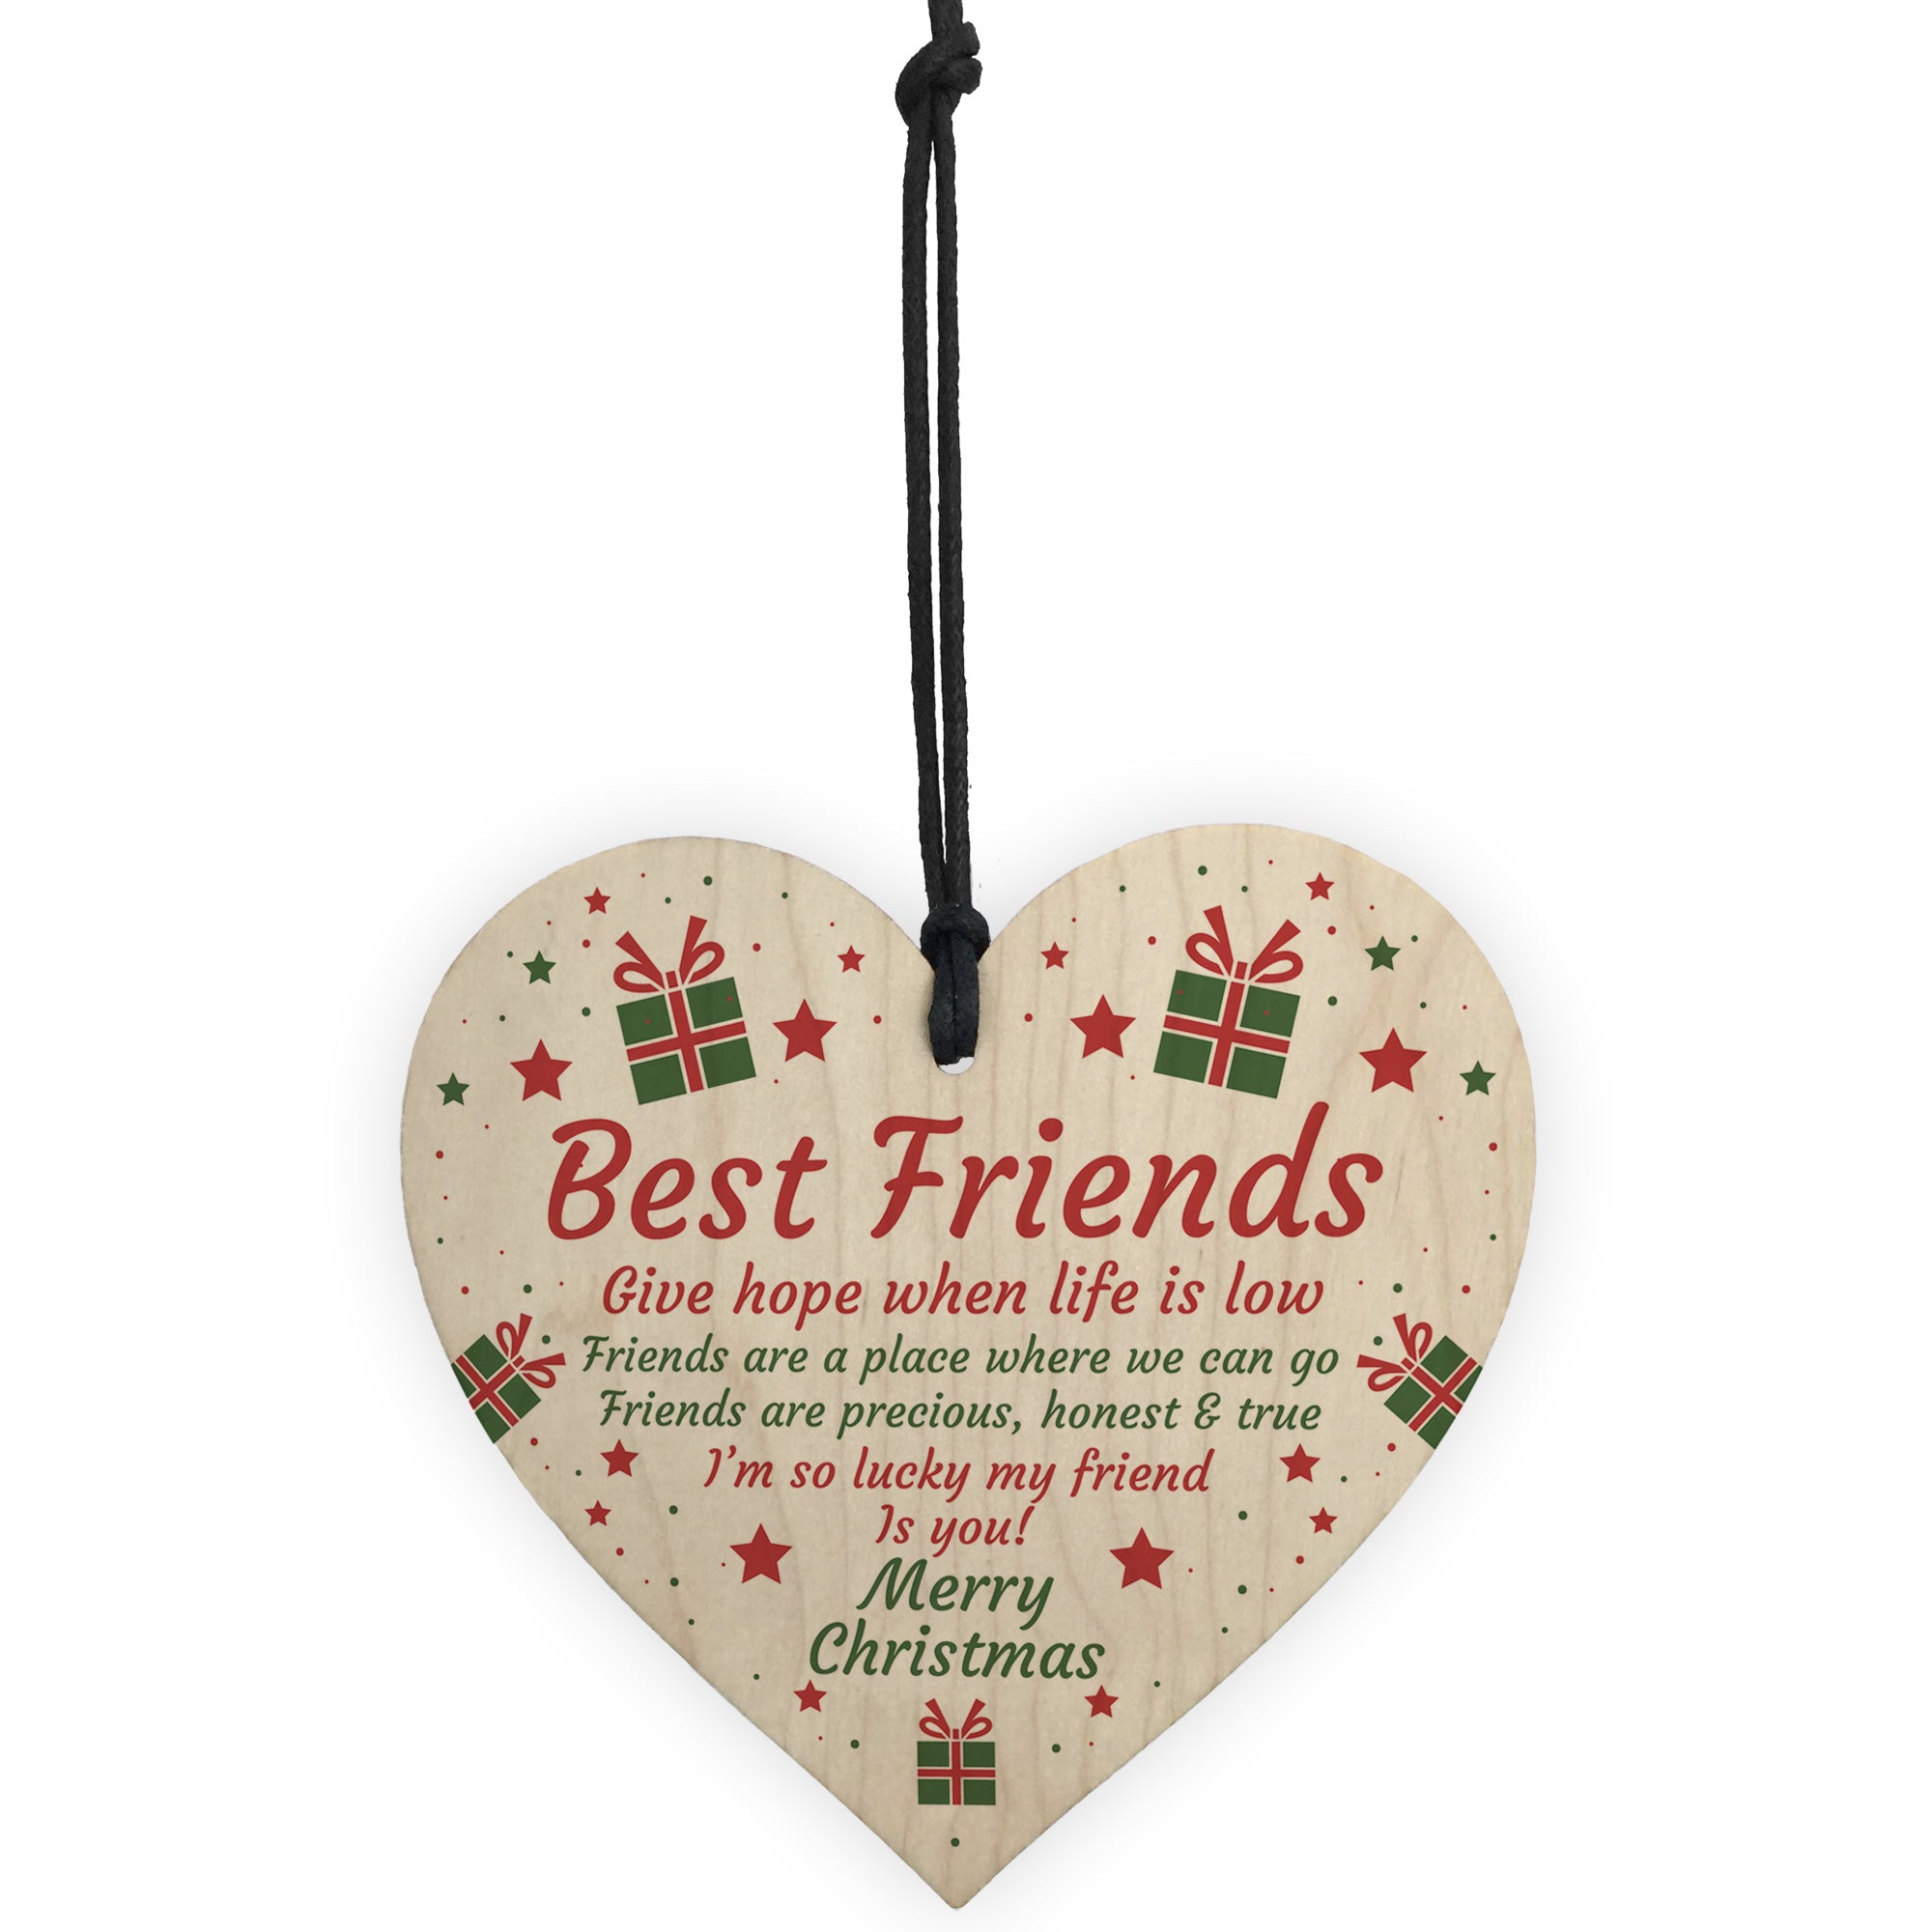 10 Unique Christmas Gifts To Give Your Best Friend